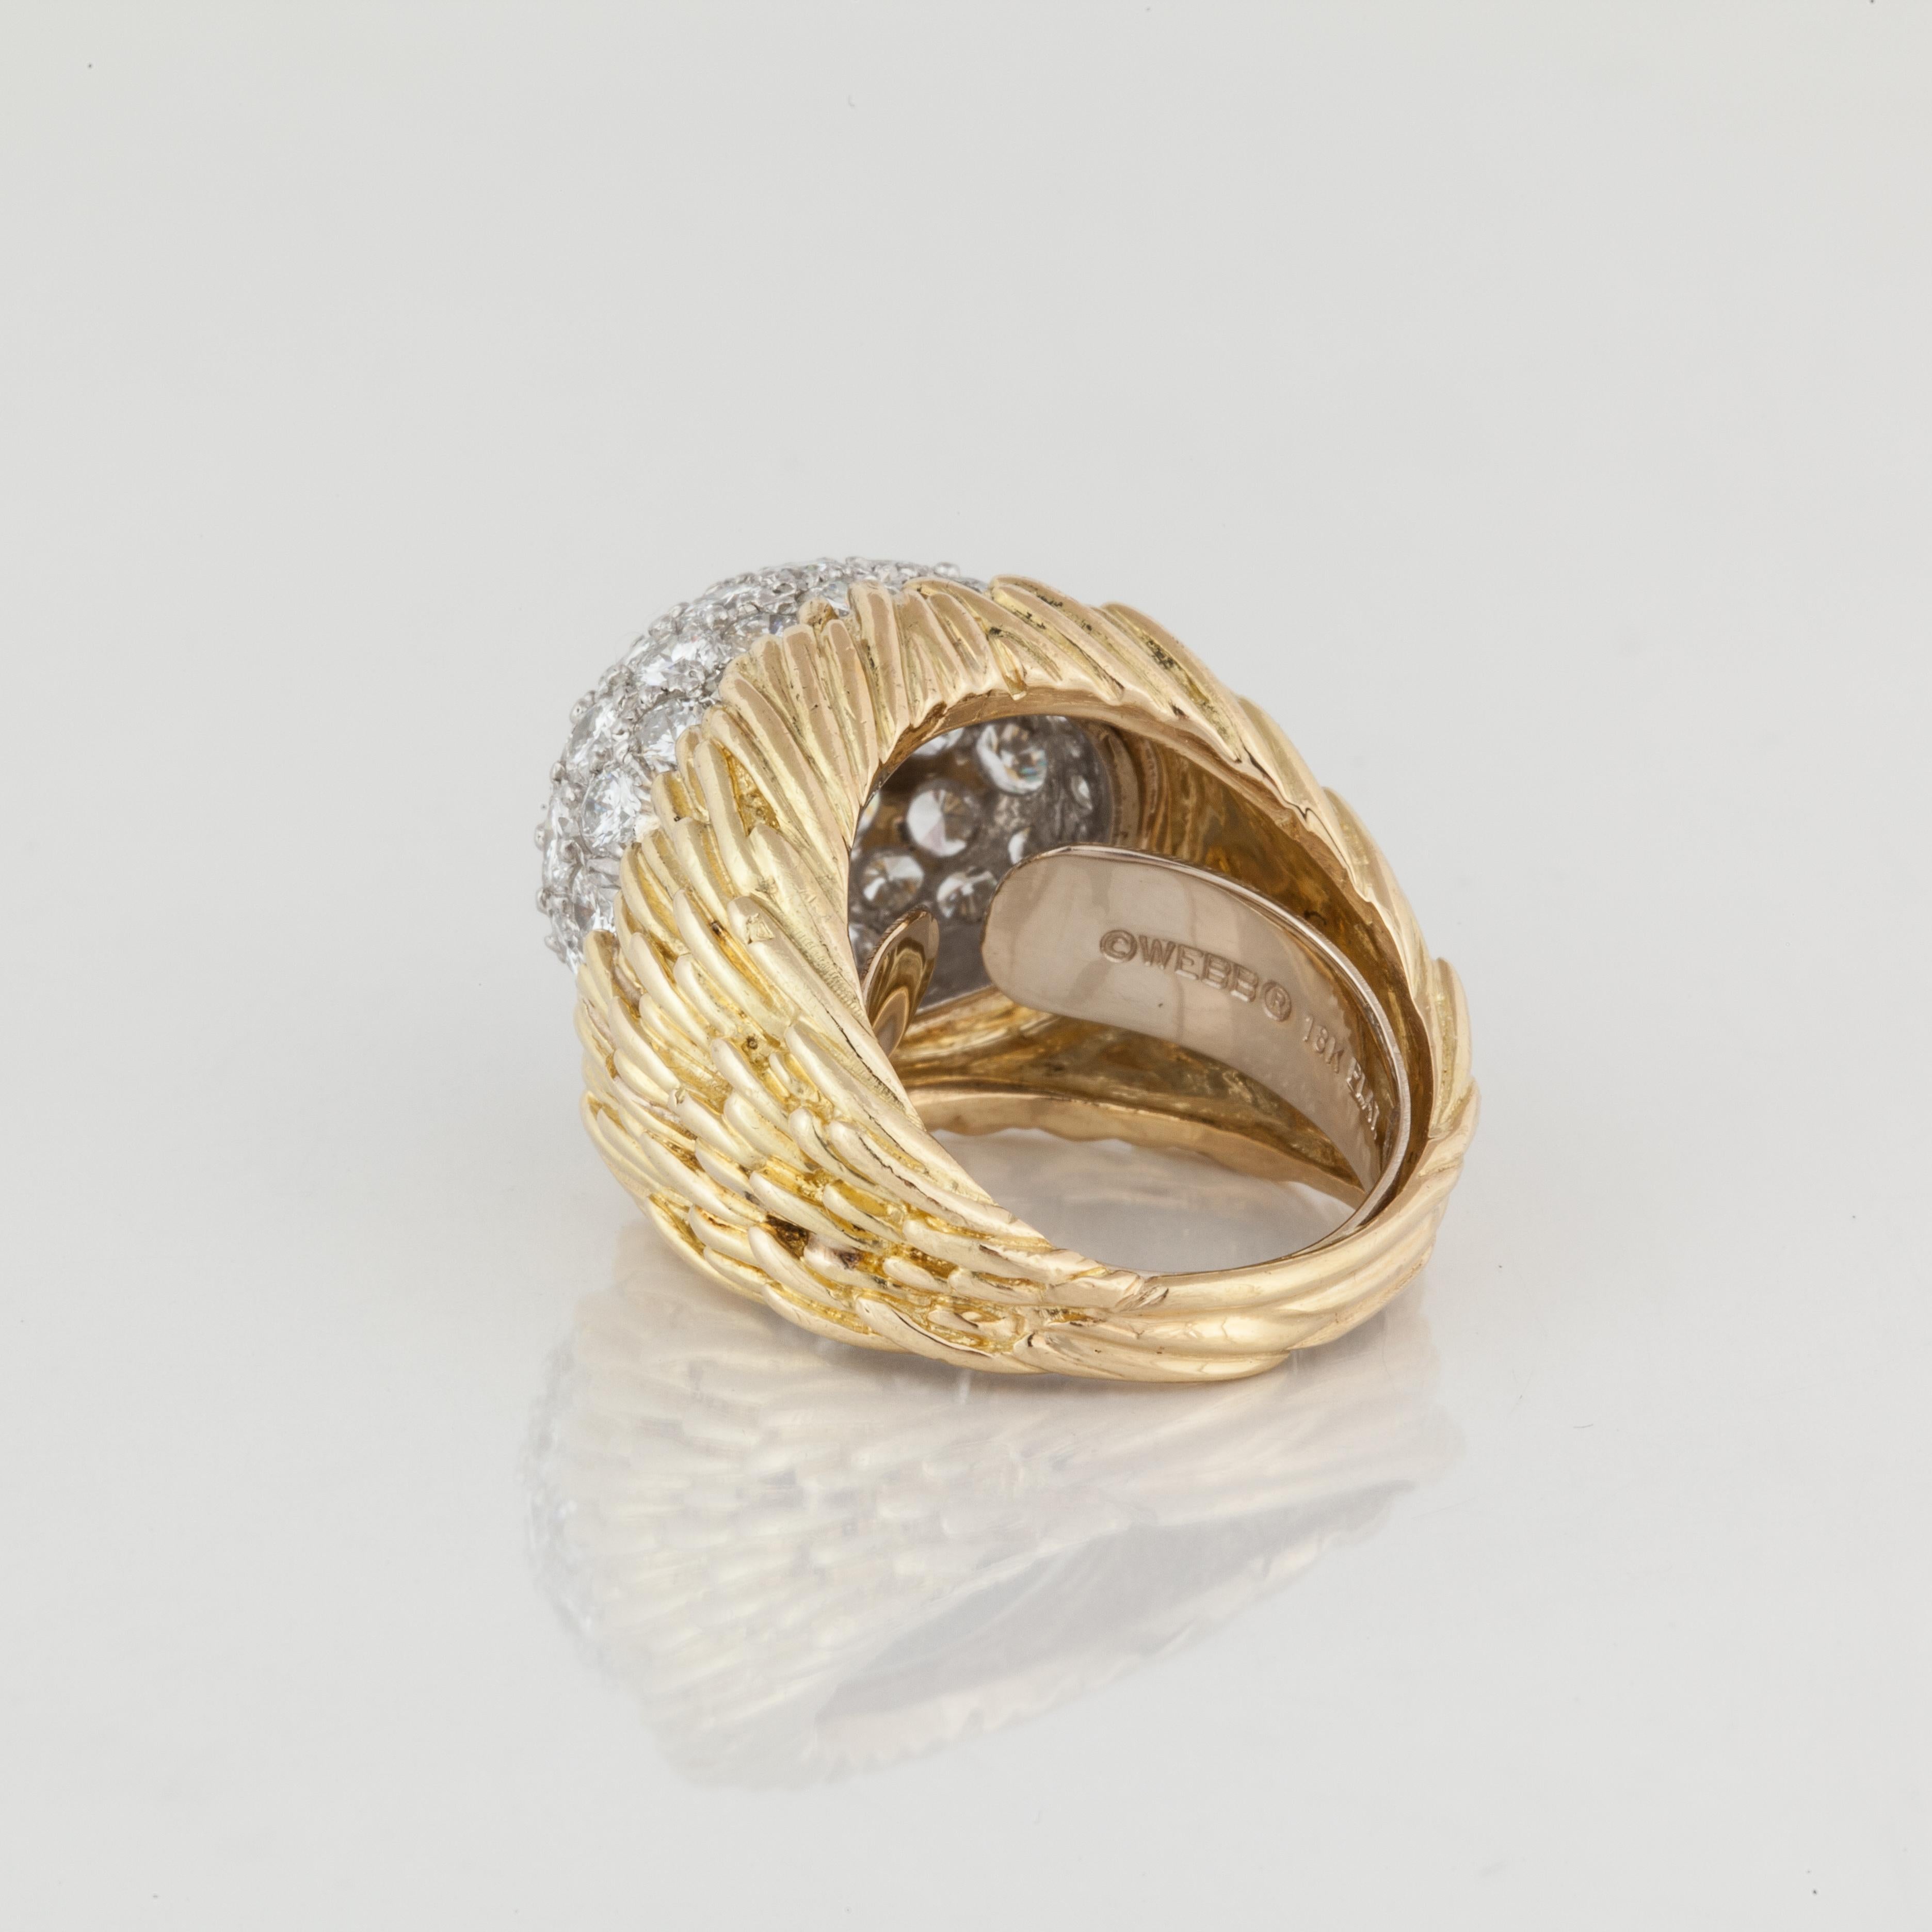 Vintage David Webb Diamond Dome Ring in 18K Gold In Good Condition For Sale In Houston, TX